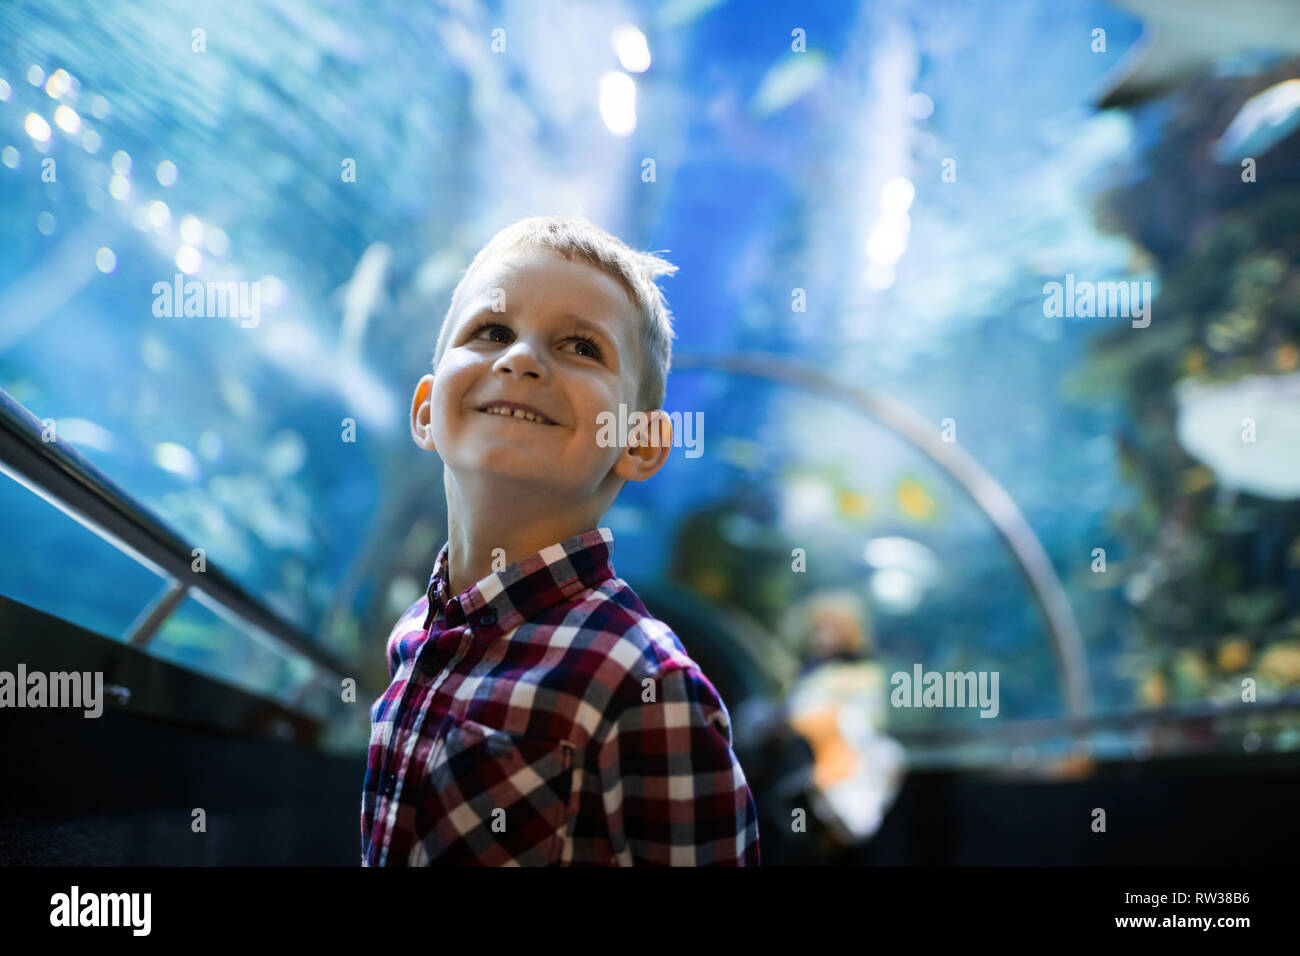 Serious boy looking in aquarium with tropical fish Stock Photo